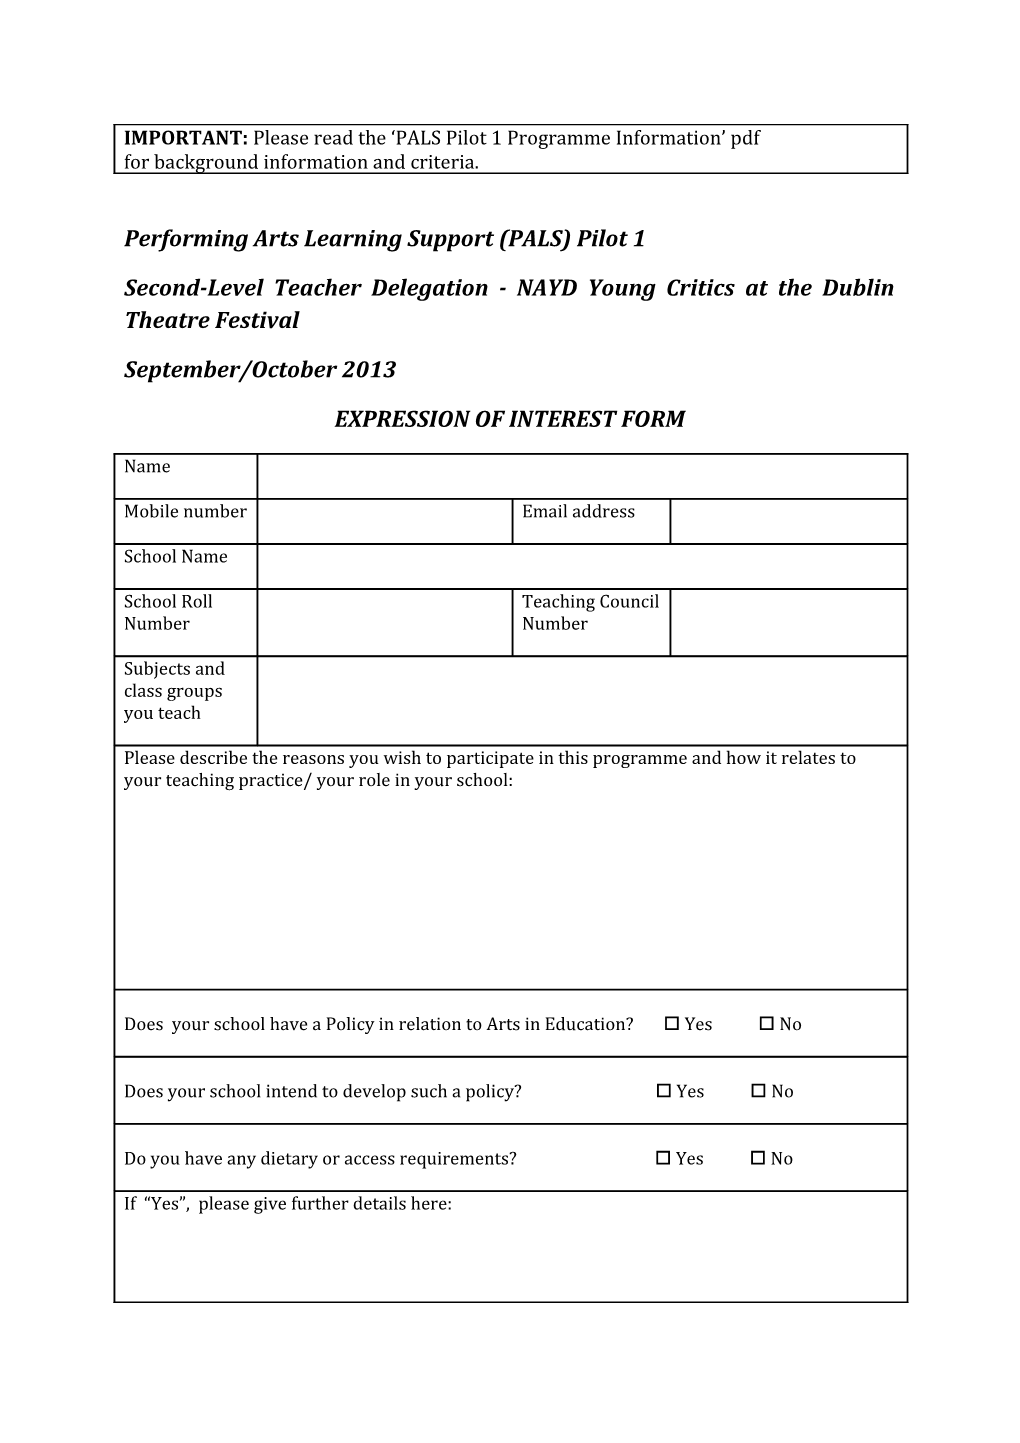 Performing Arts Learning Support (PALS) Pilot 1